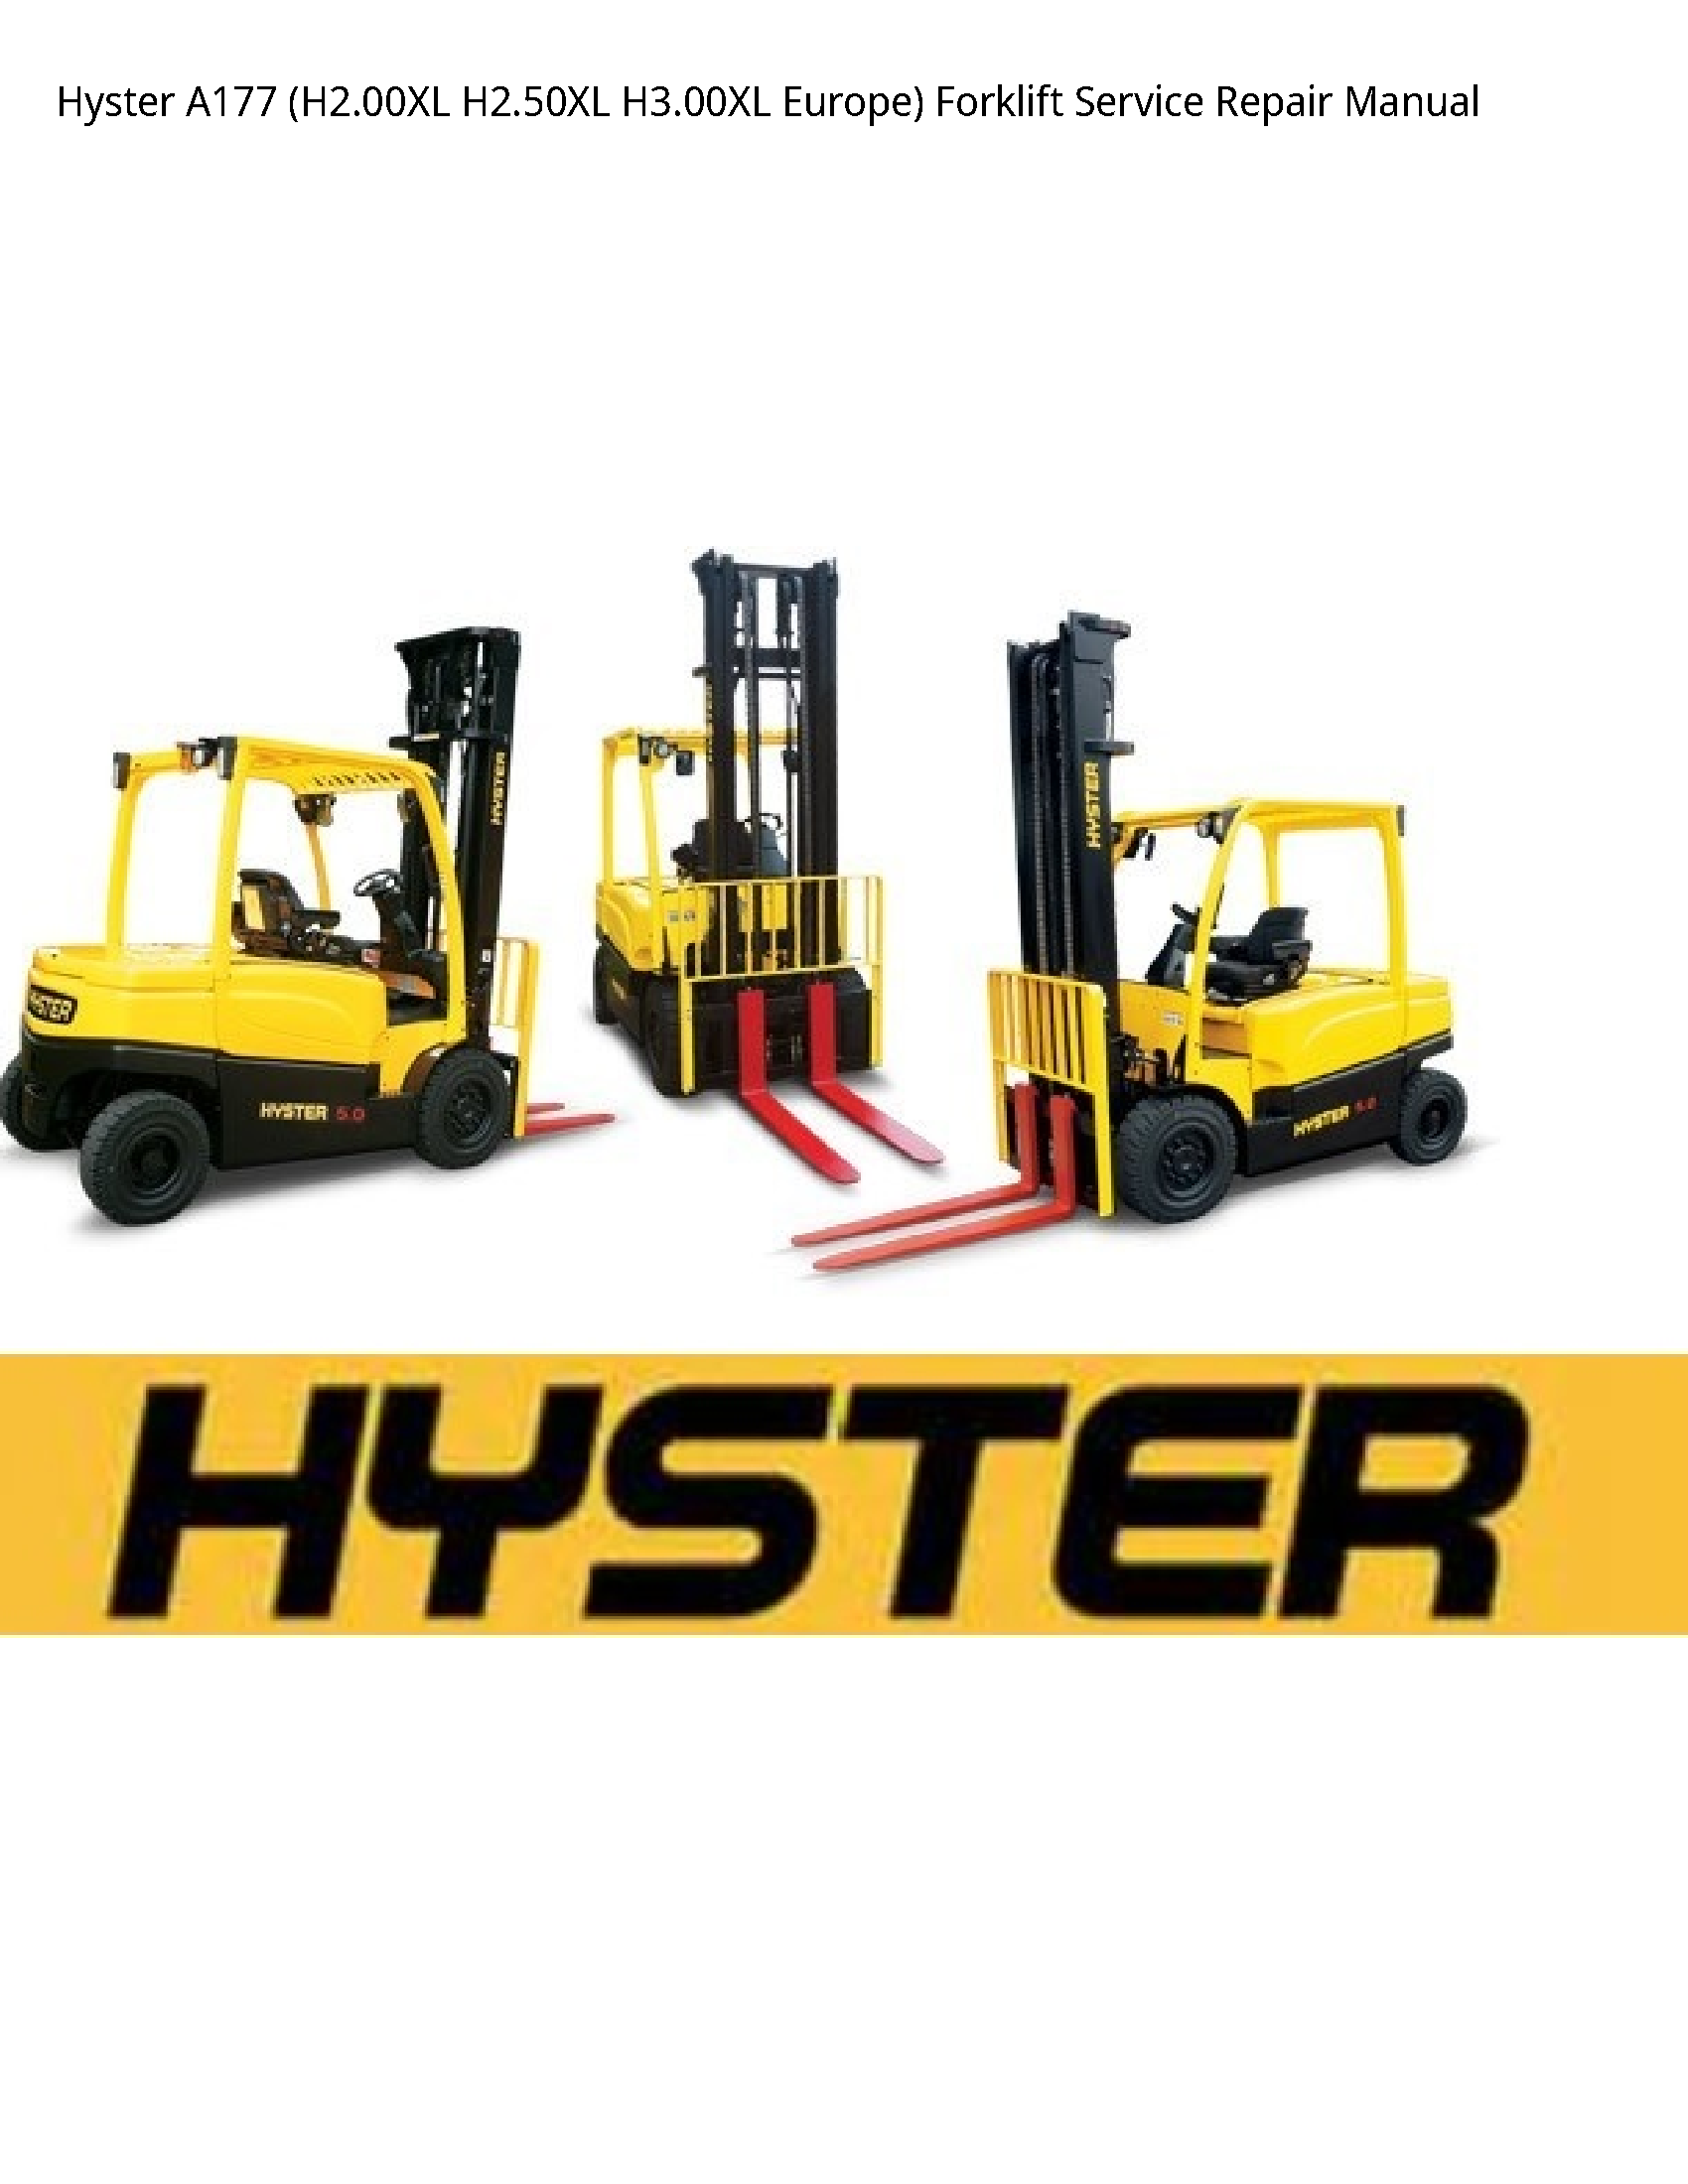 Hyster A177 Europe) Forklift manual